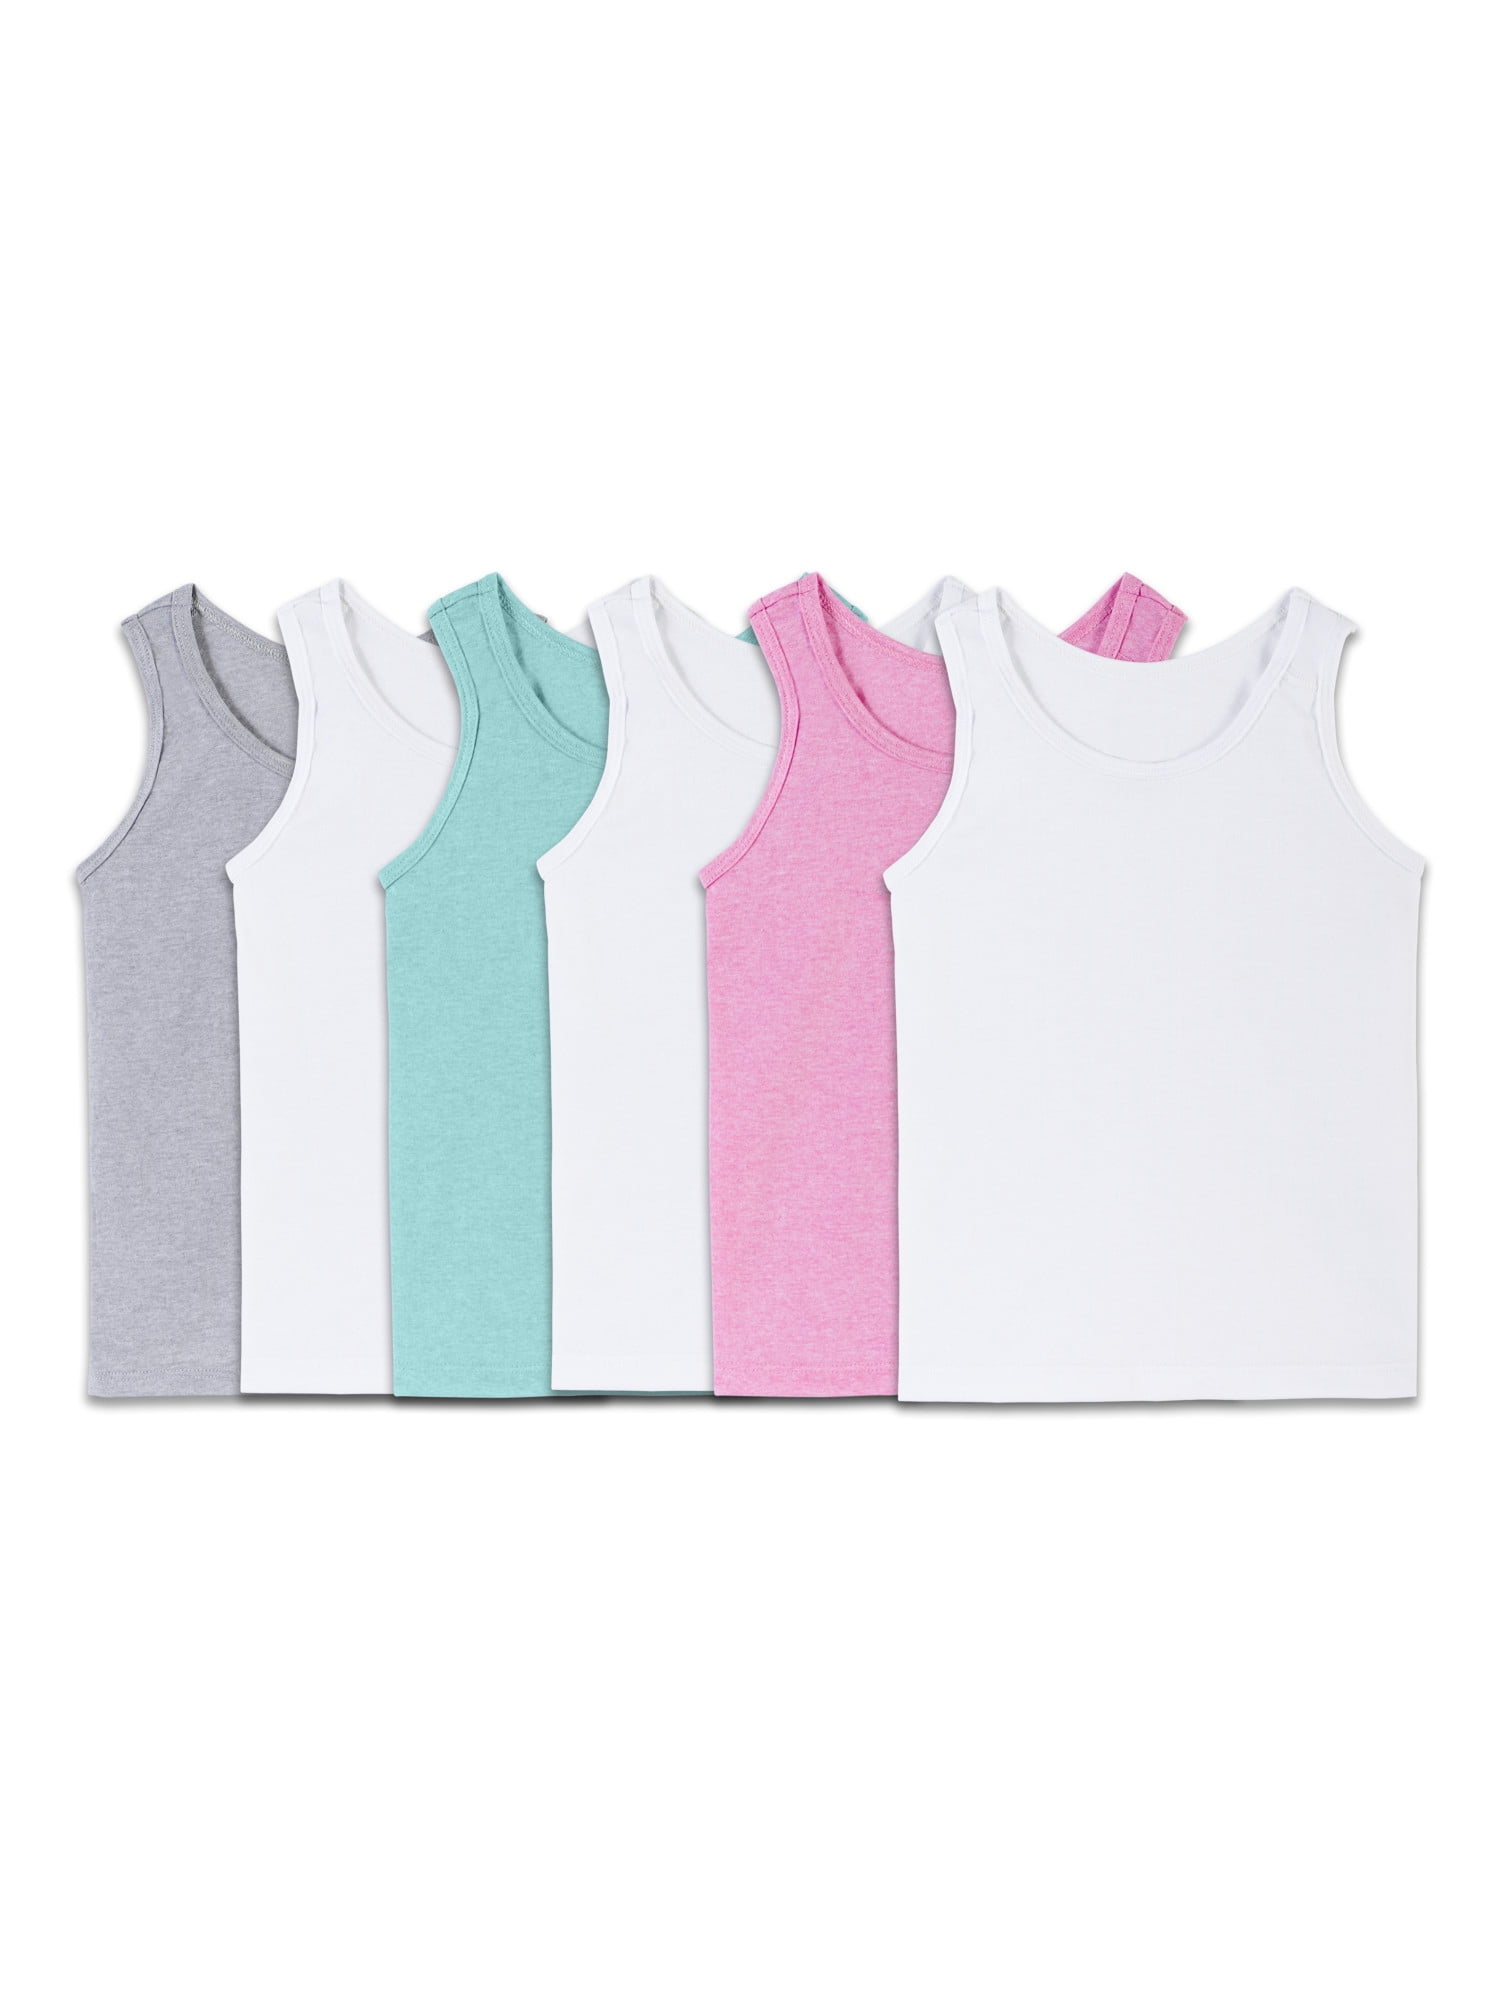 Fruit of the Loom Toddler Girl Layering Tank Tops, 6 Pack, Sizes 2T-5T ...